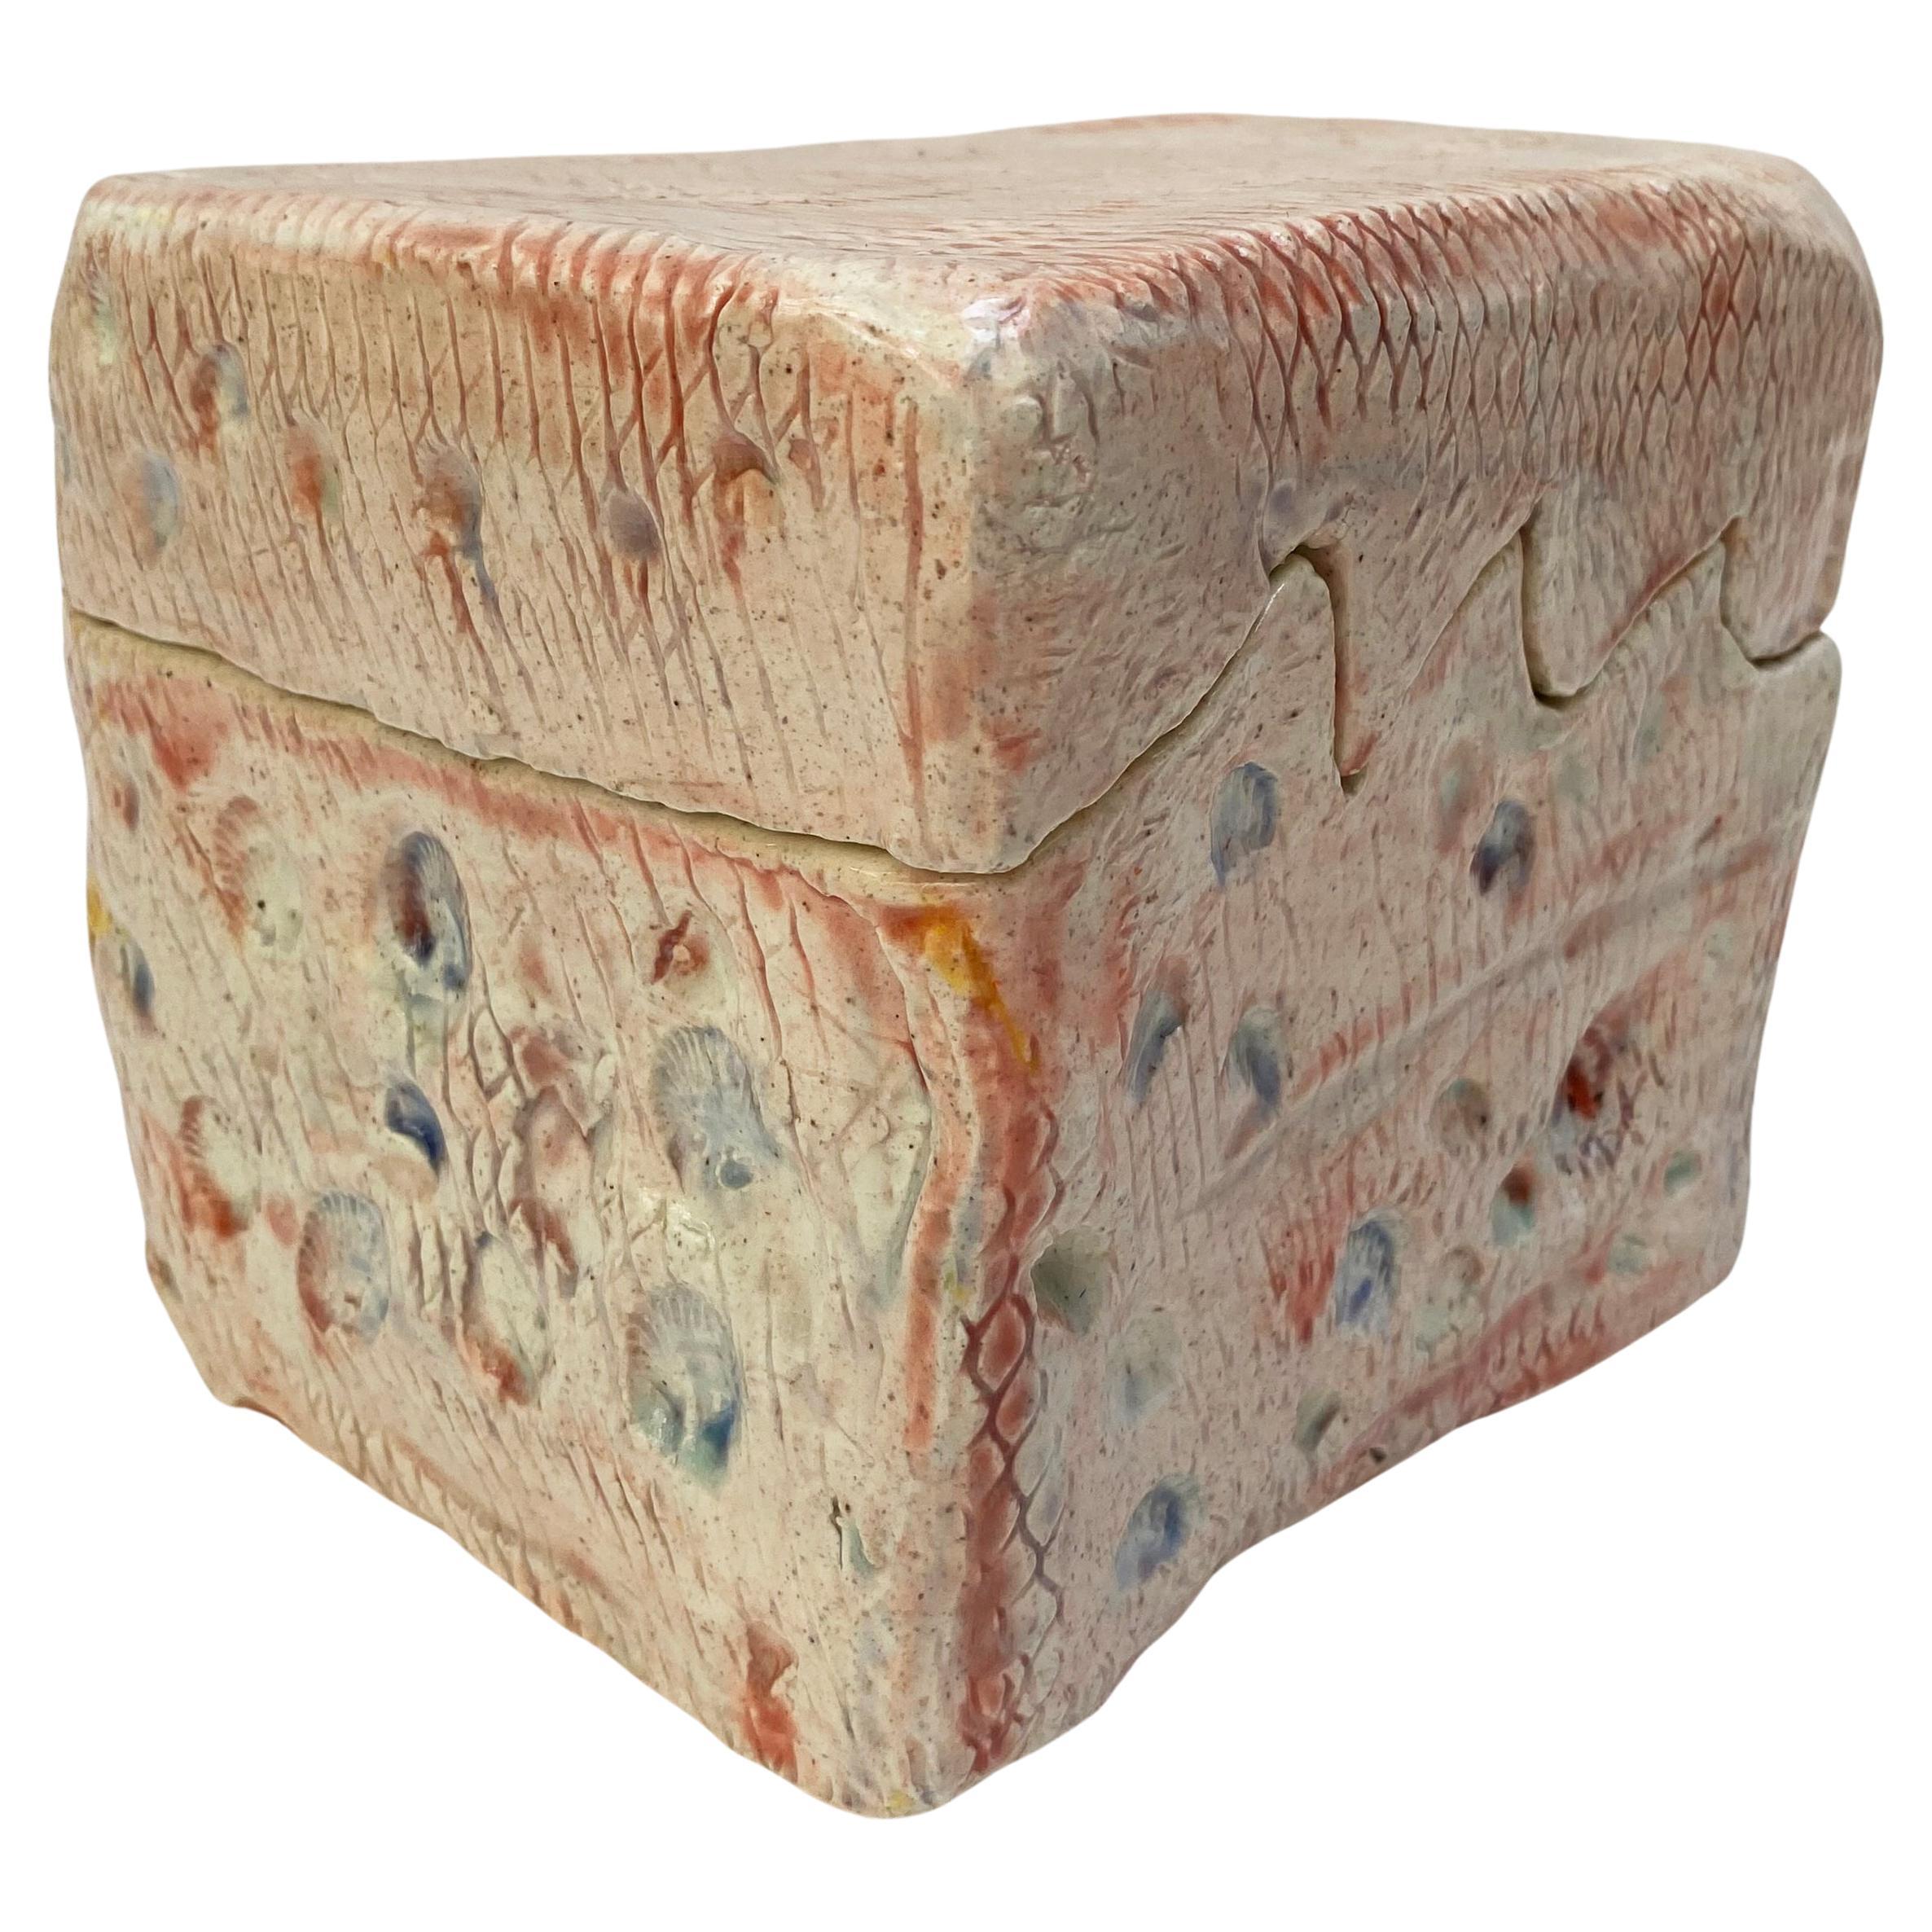 Hand Made Abstract Sculptural Glazed Ceramic Box. Fitted Lid For Sale